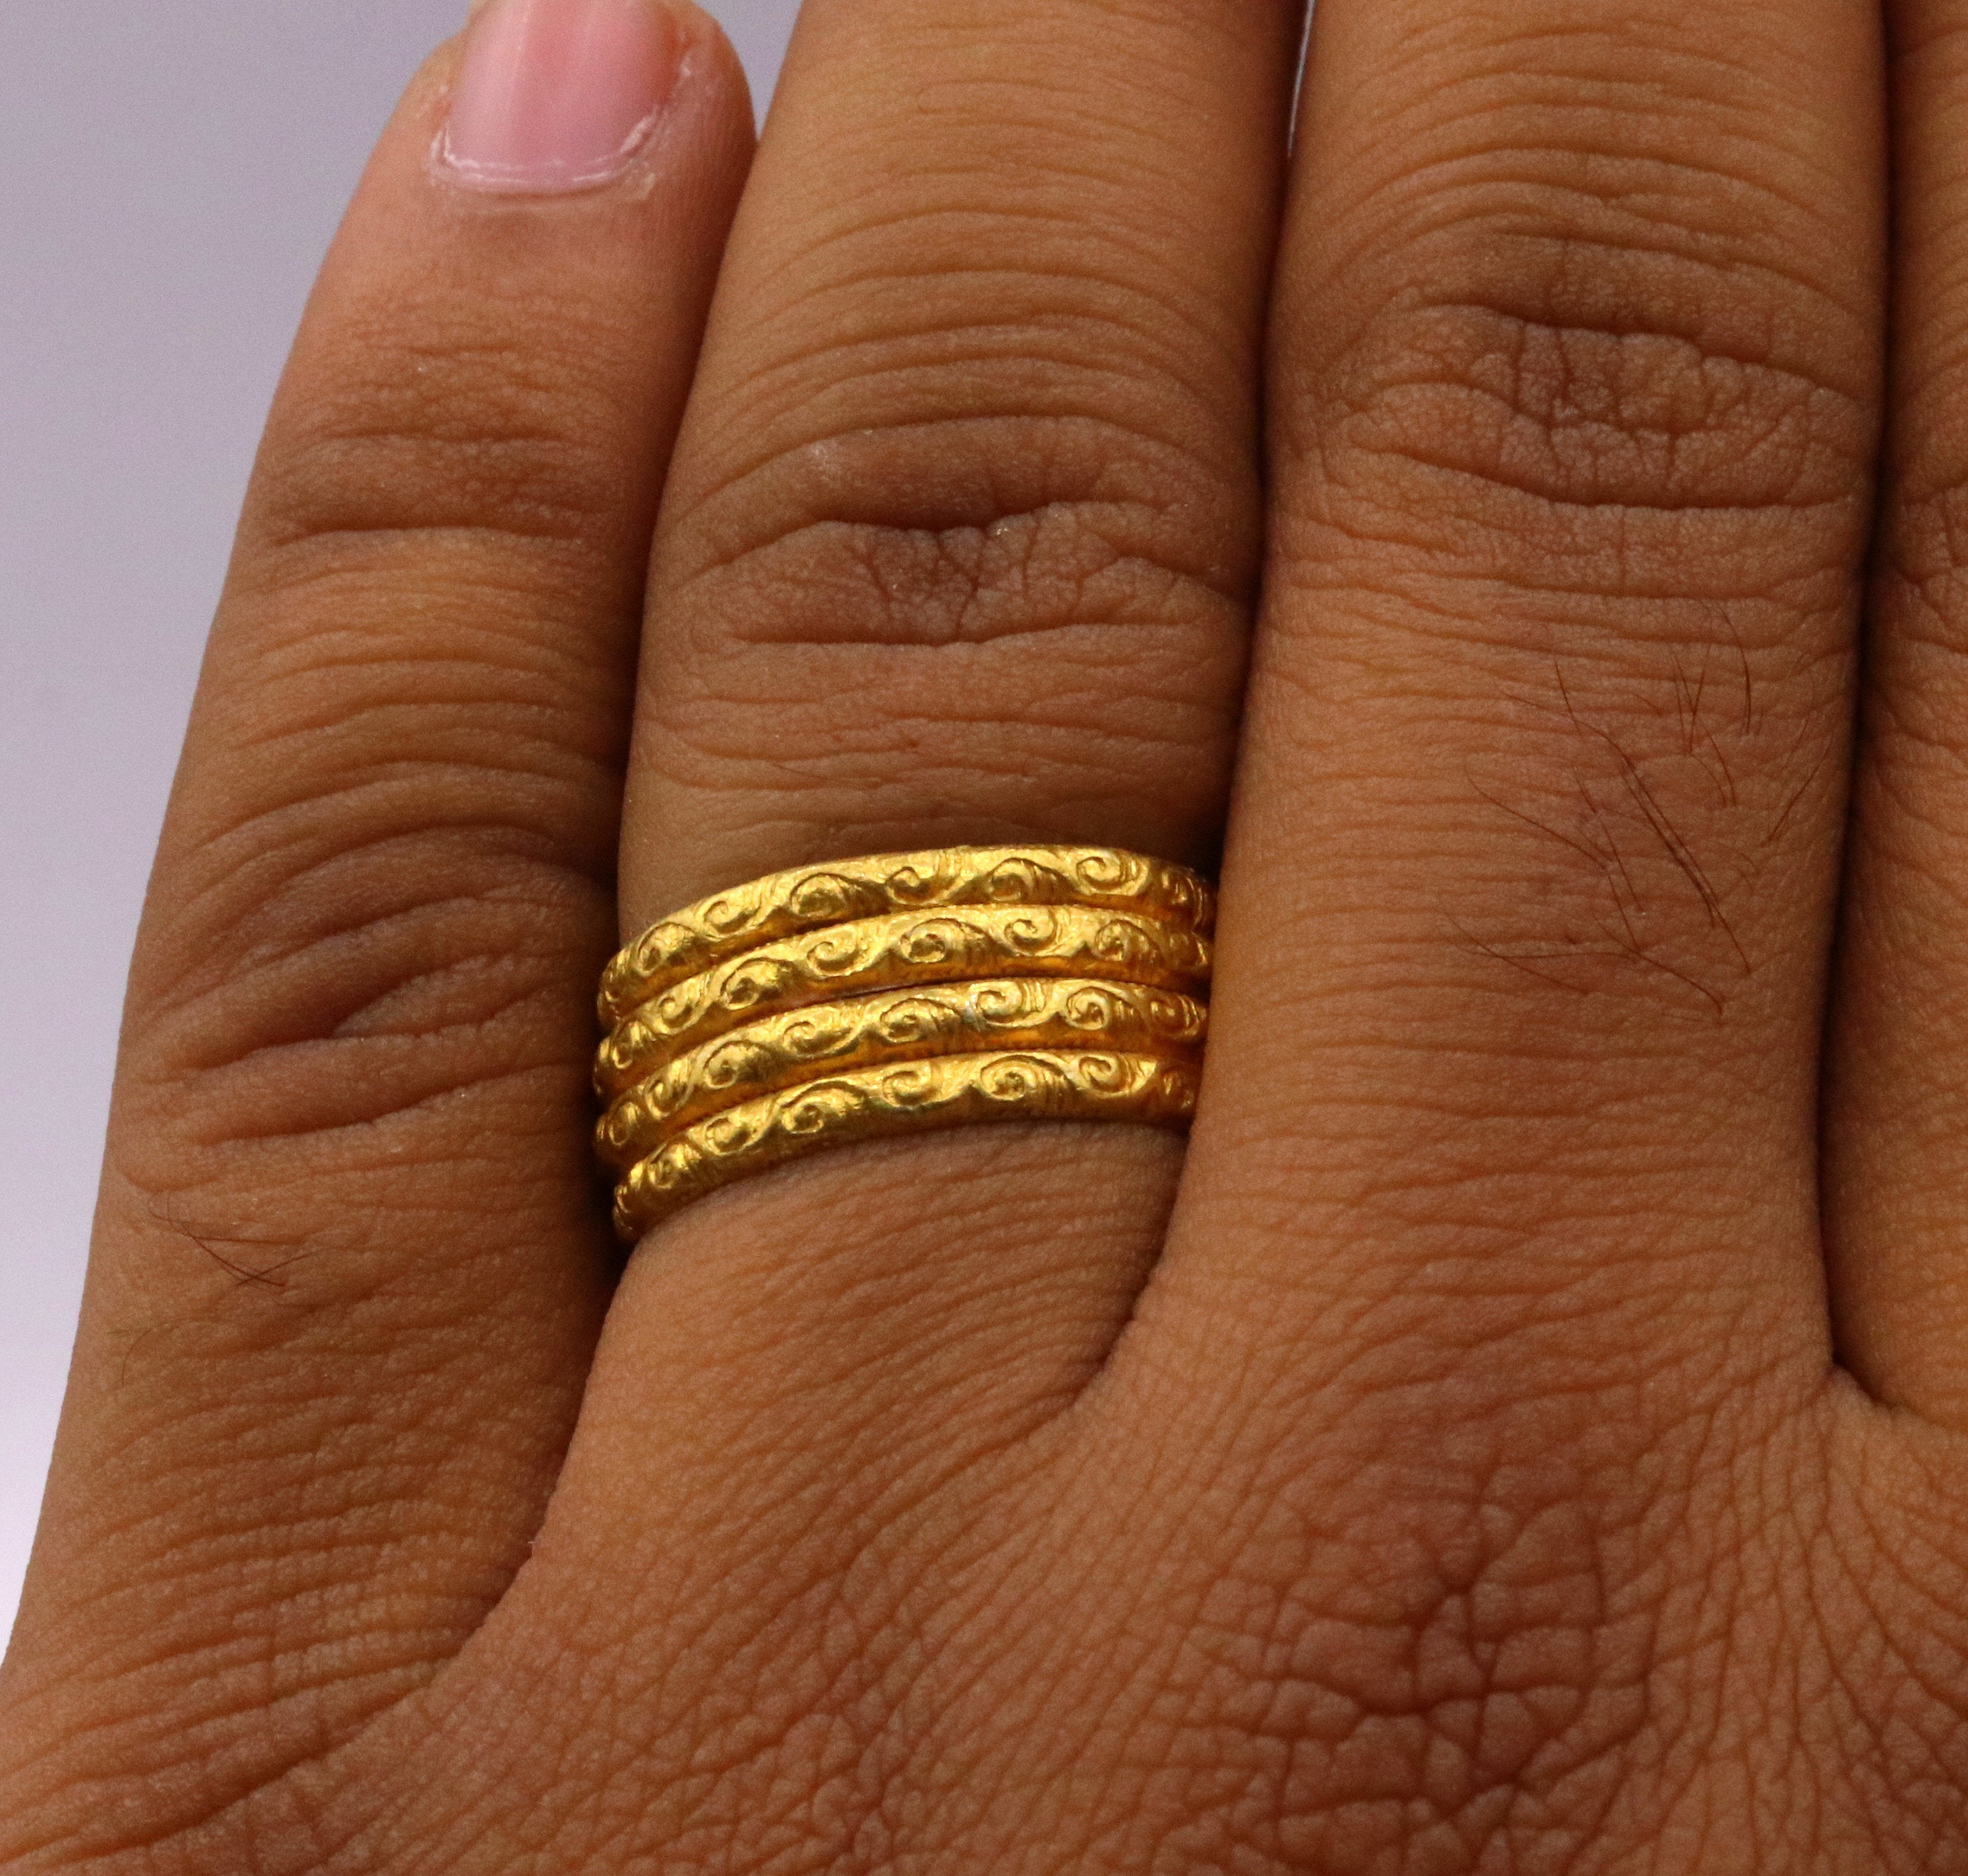 Simple Band Ring Designs in Gold & Diamond at Candere by Kalyan Jewellers